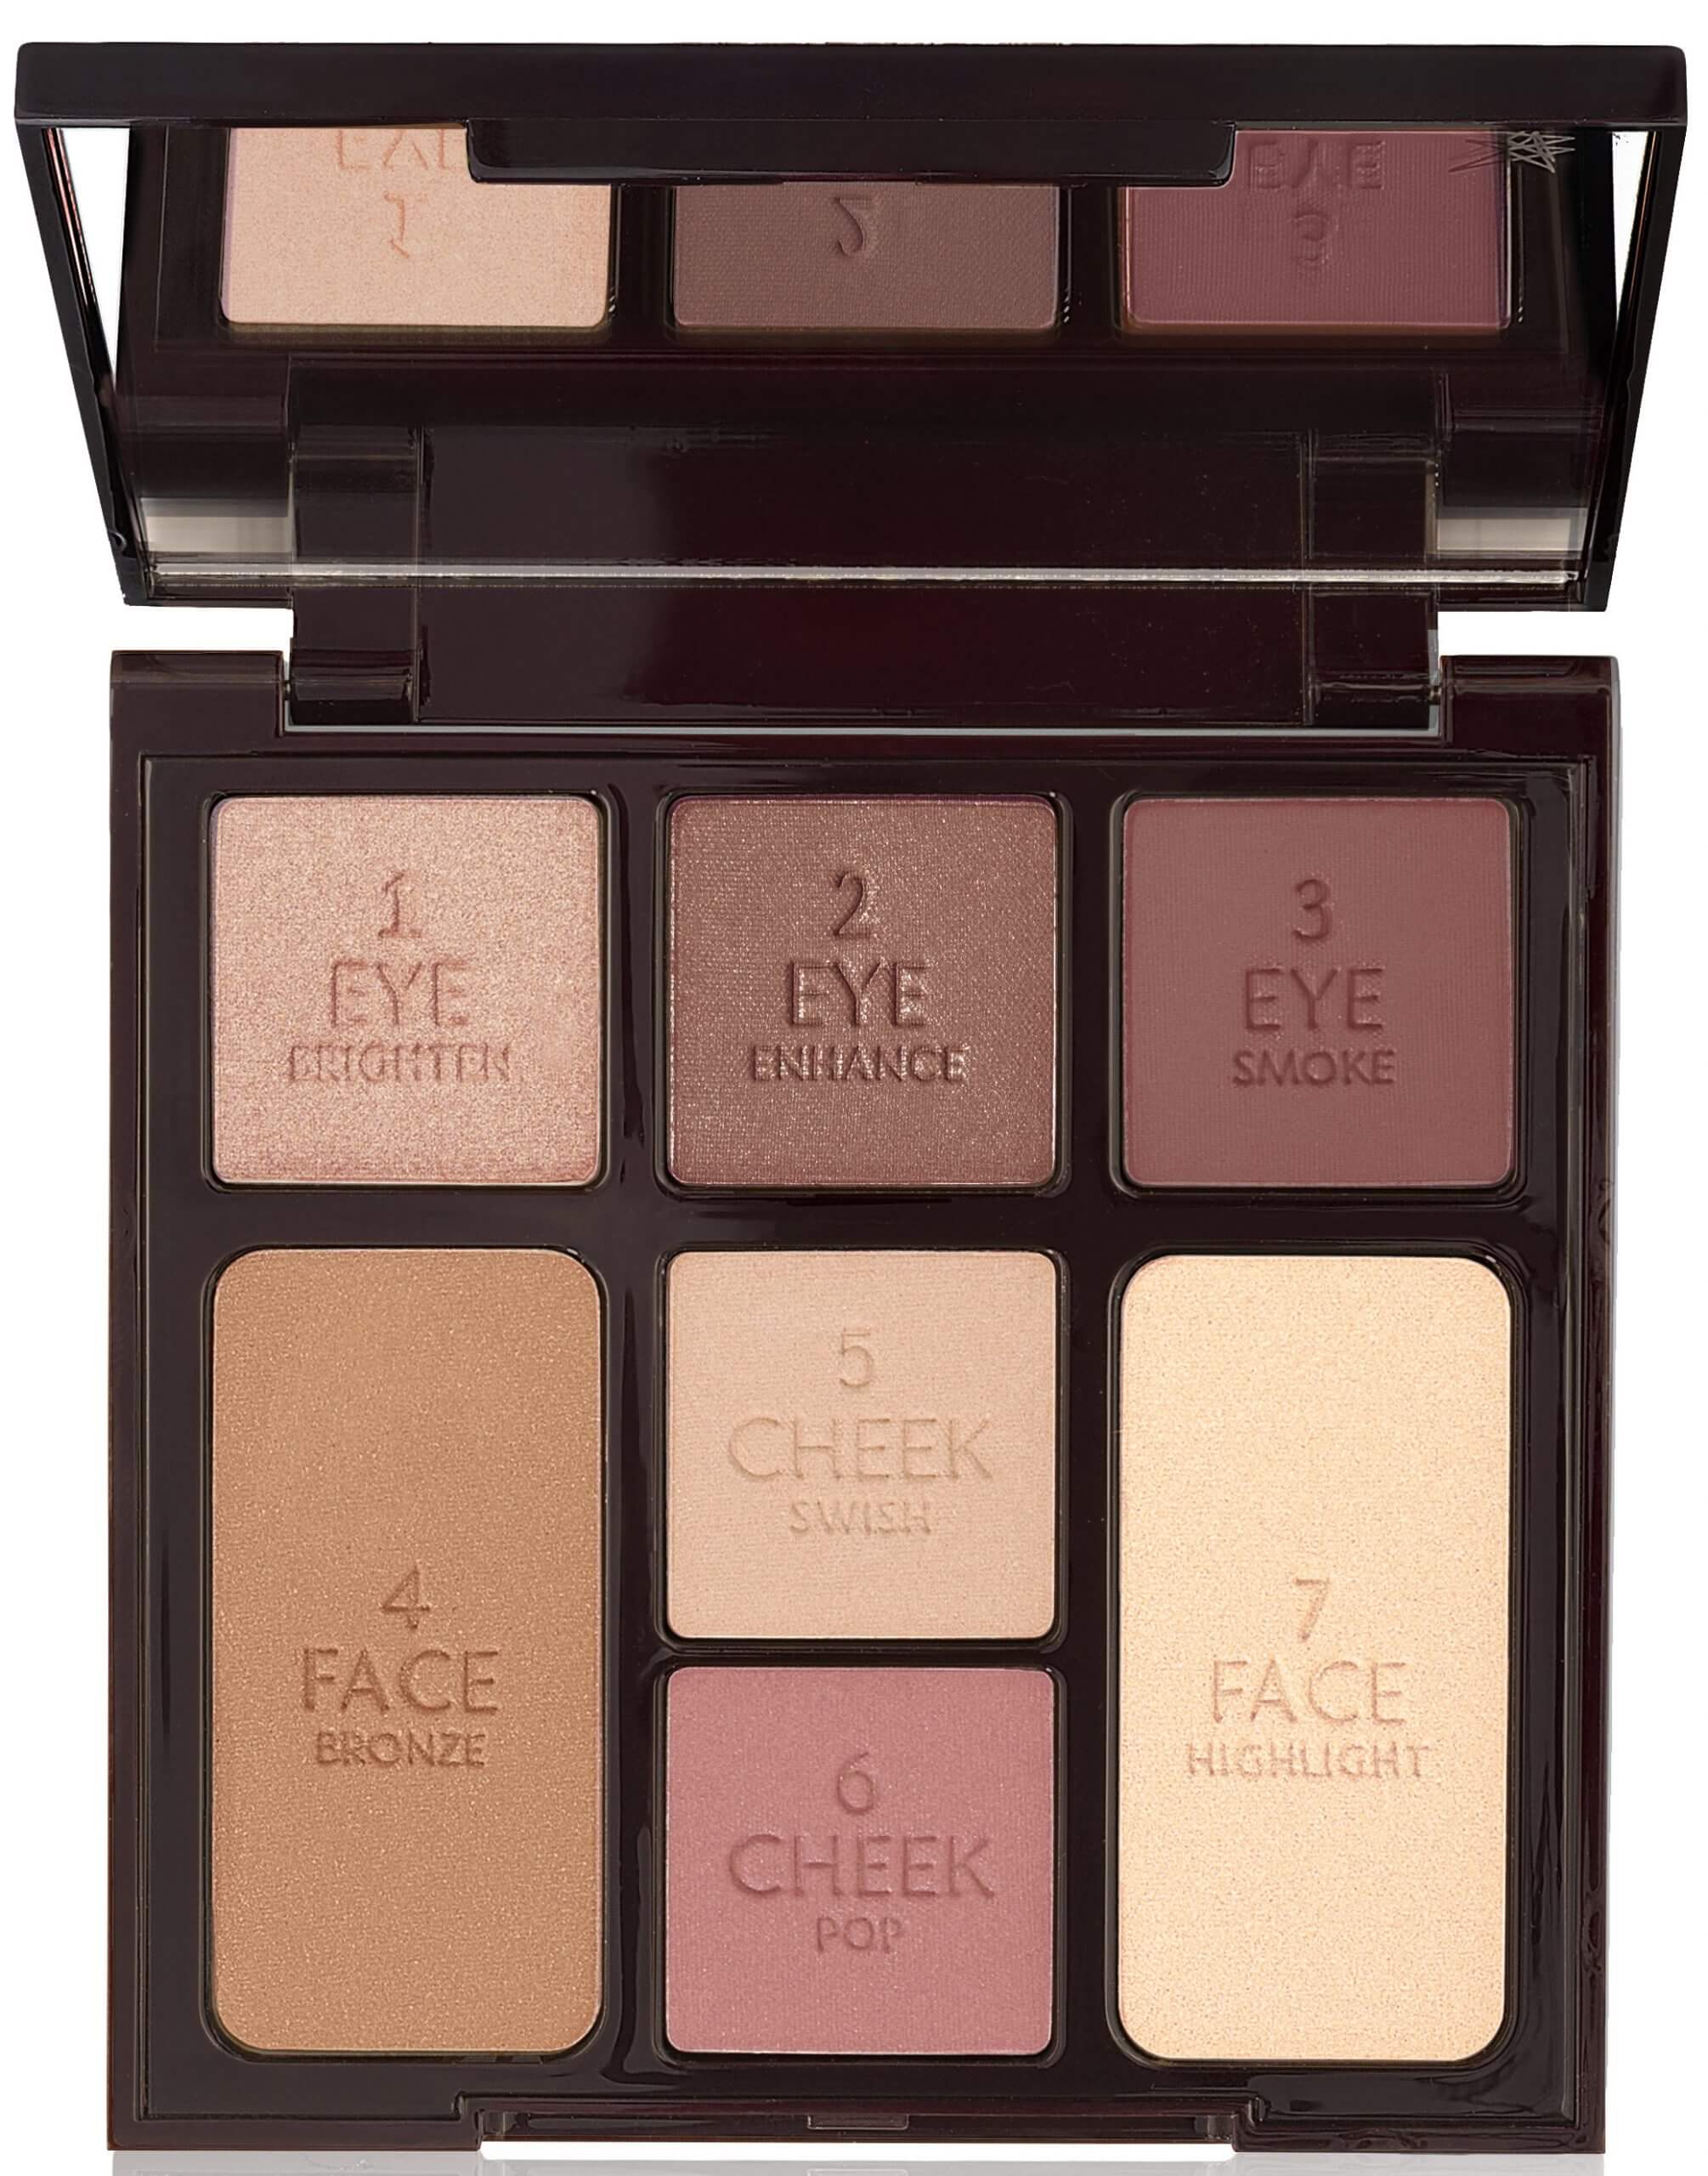 These 6 Beauty Palettes Are Perfect For Brown Skin